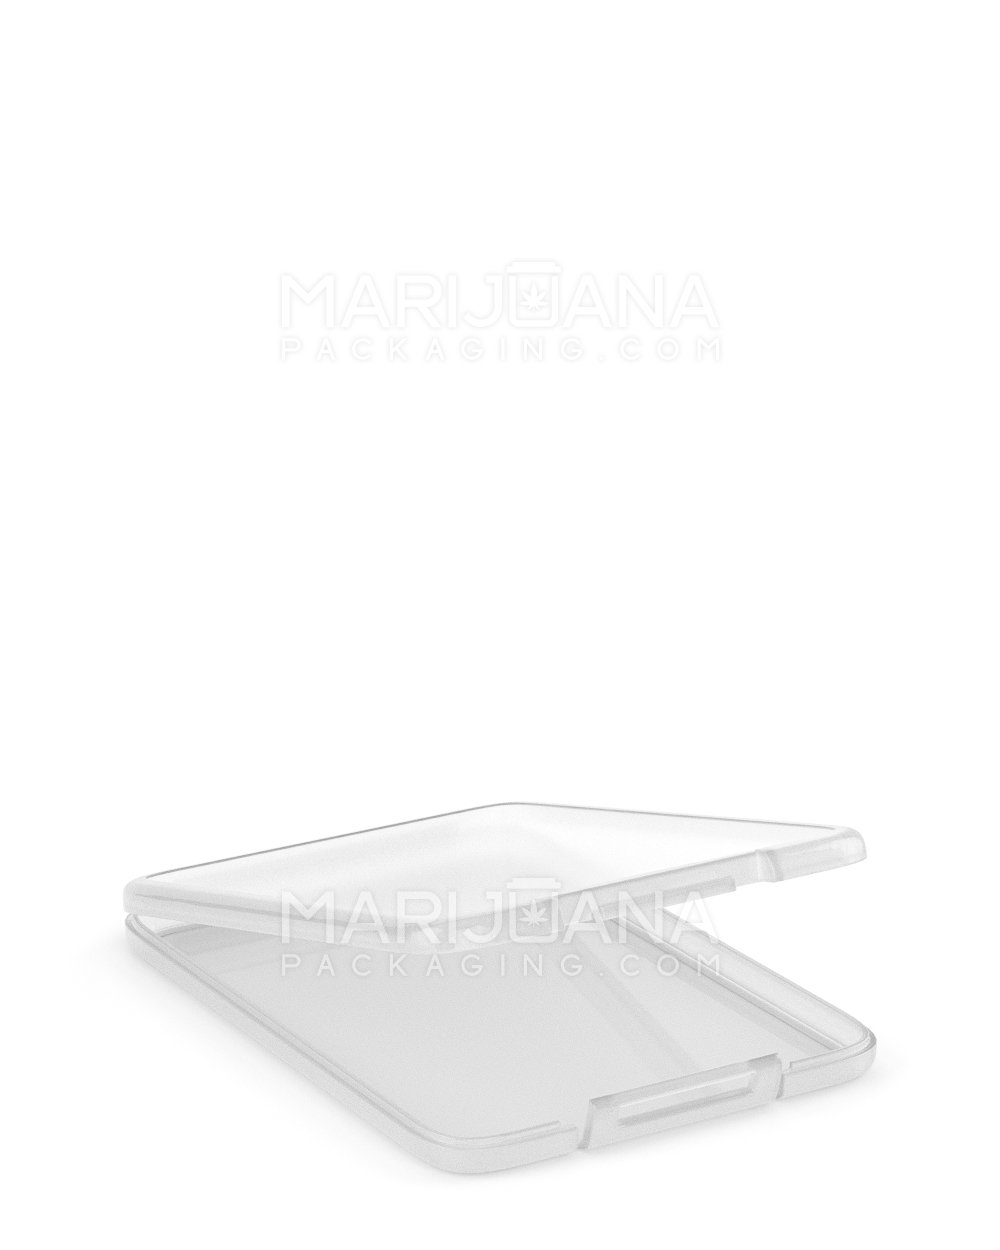 Hinged Lid Slim Shatter Container | 4.5 mm - Clear Plastic - 1000 Count - 2